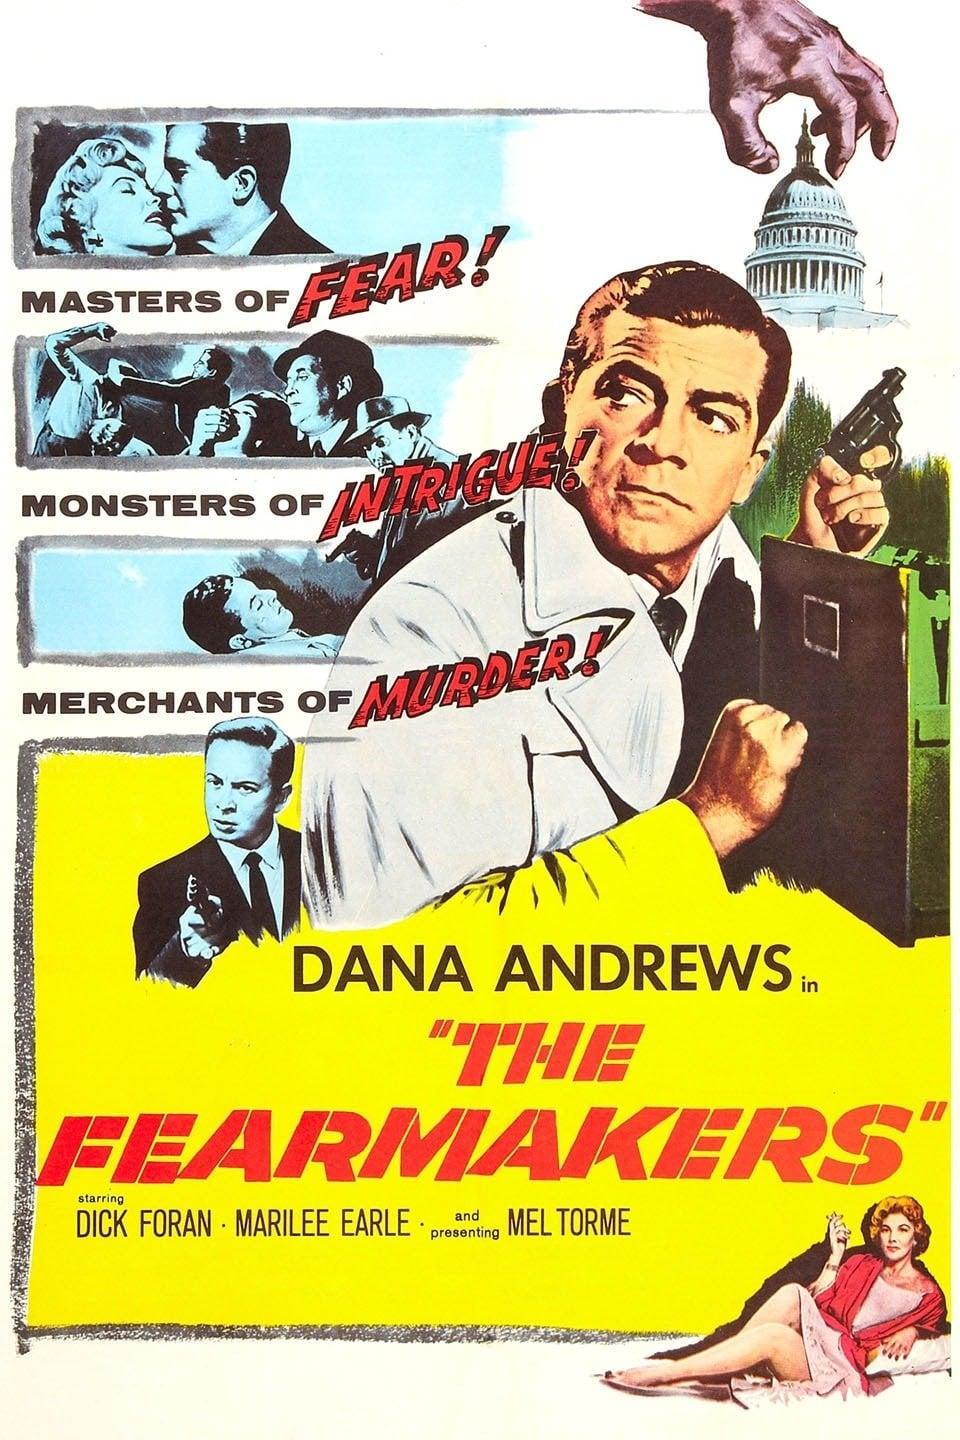 The Fearmakers poster